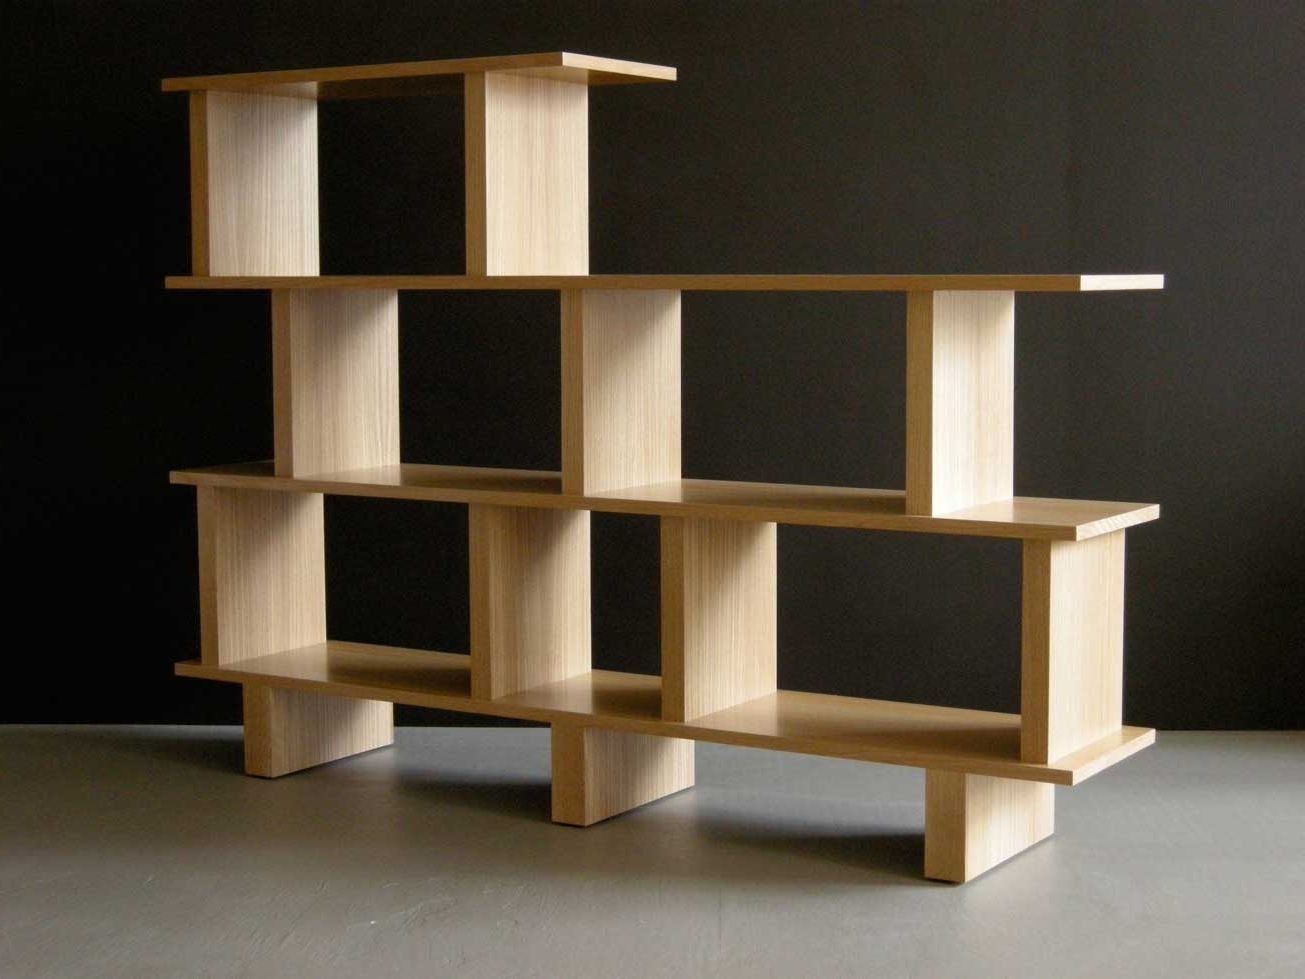 Design Bookshelf Incredible 10 Bookcas Design, Bookshelves Inside Best And Newest Design A Bookcases (View 10 of 15)